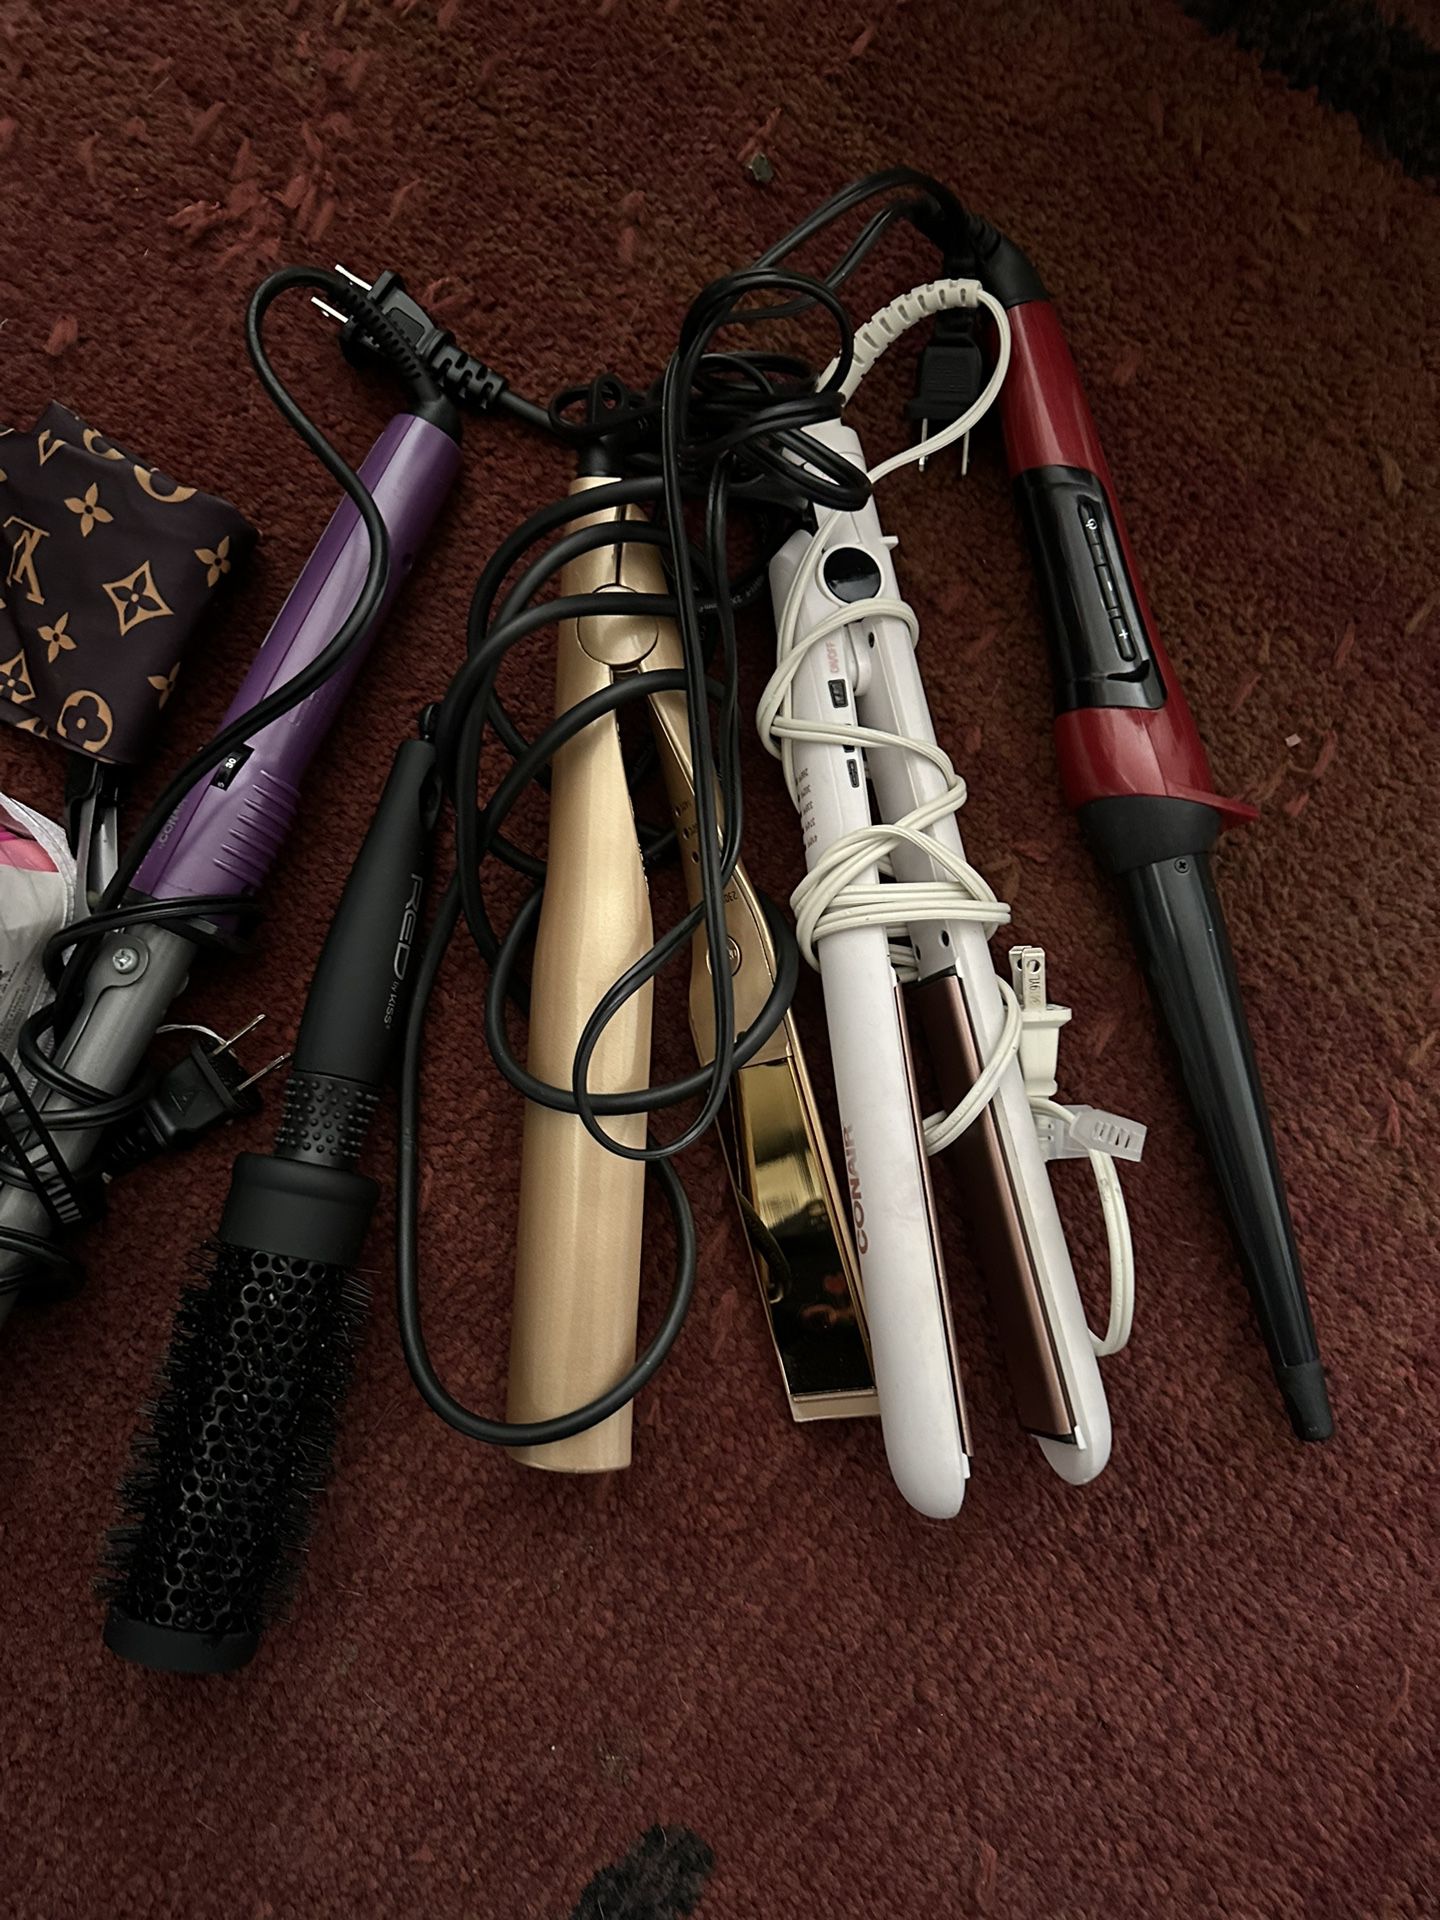 7 curling irons and hair straighteners